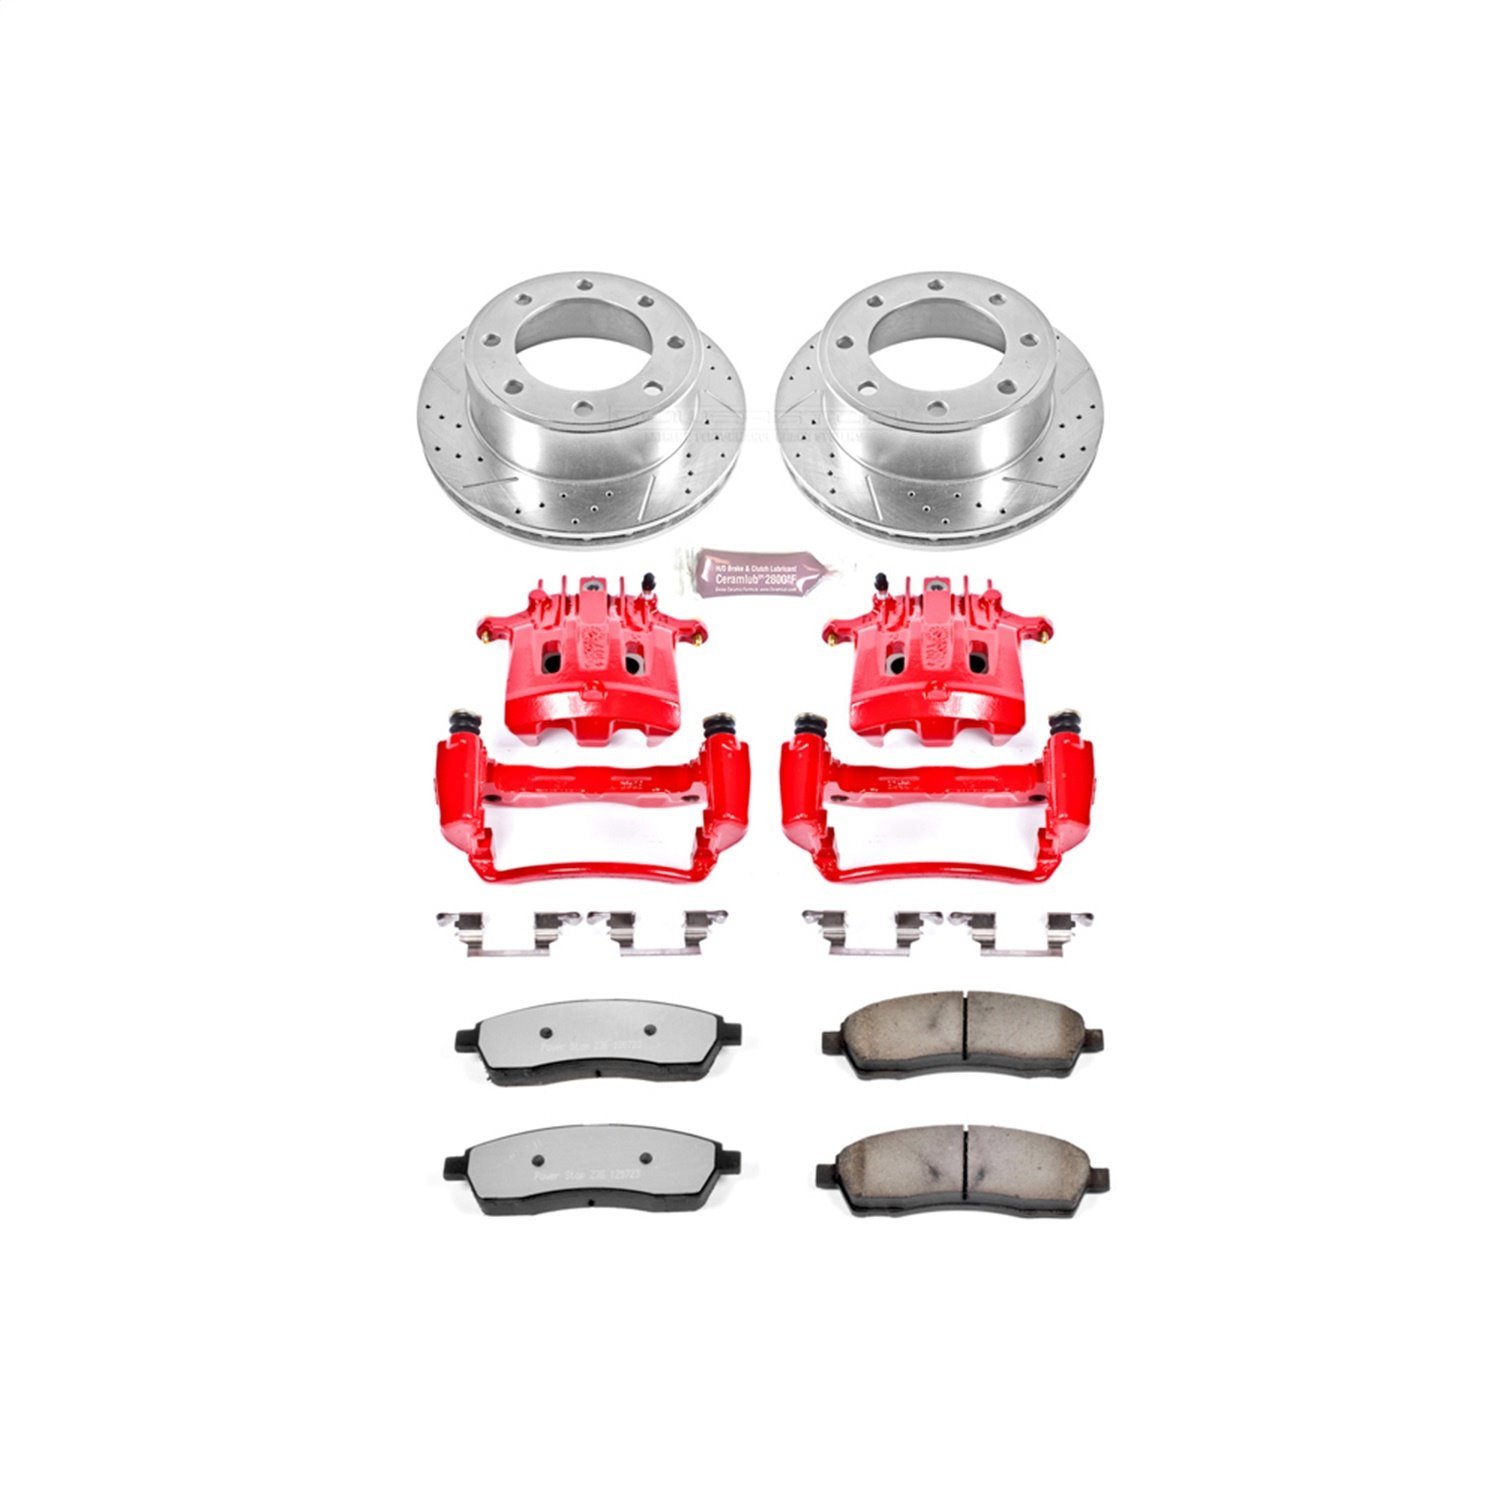 Truck and Tow Z36 Rear Brake Pad, Rotor and Caliper Kit